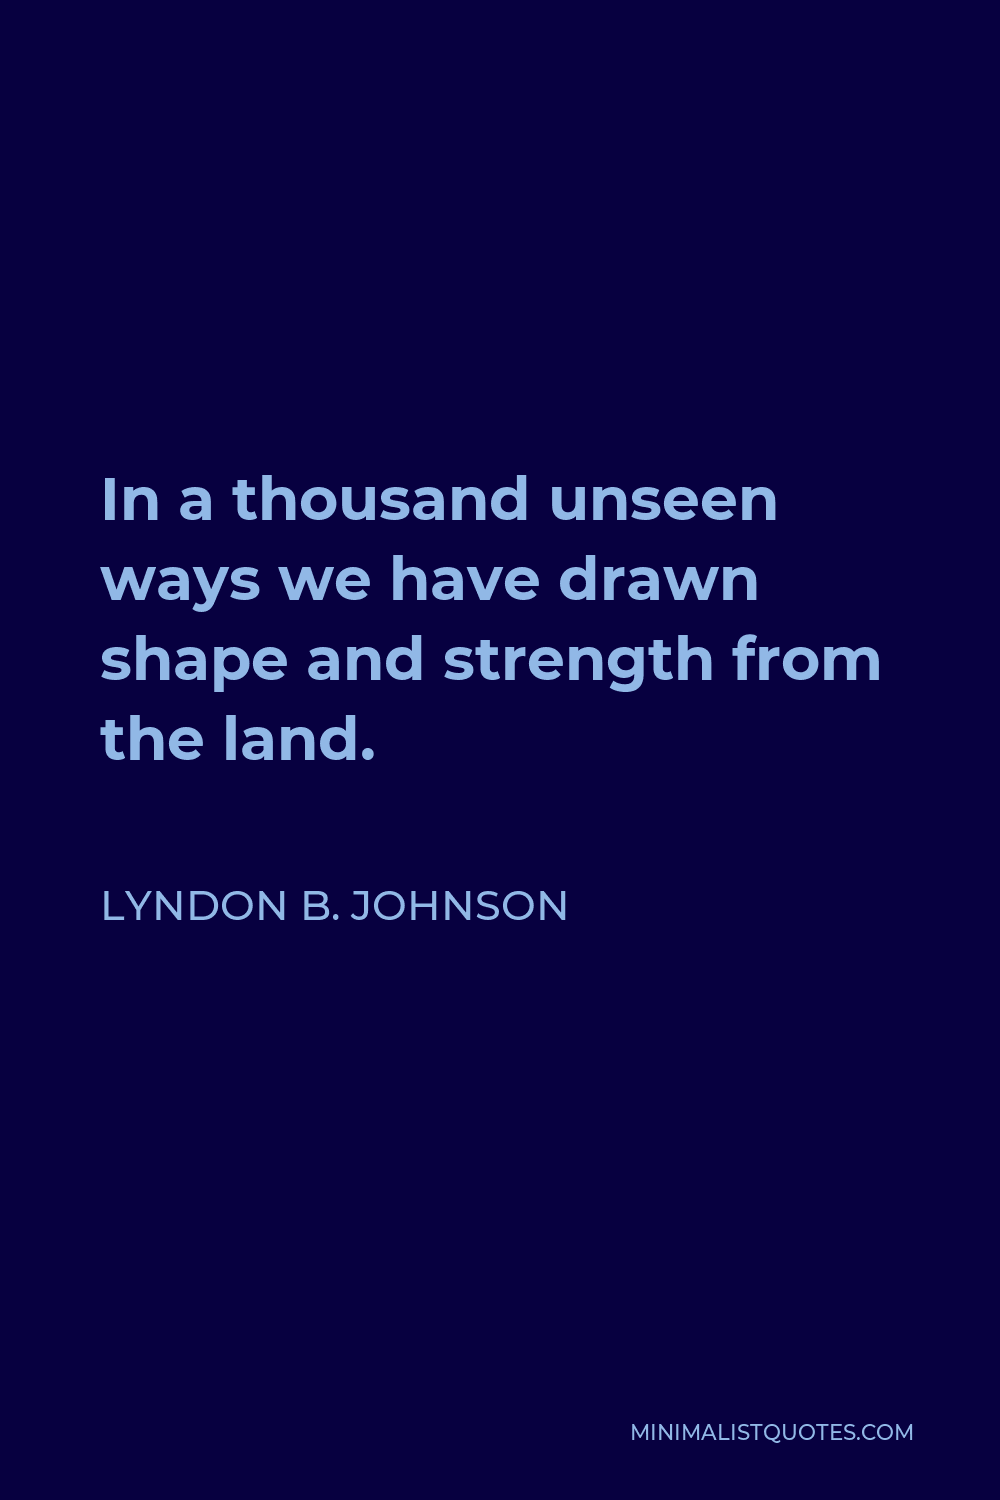 Lyndon B. Johnson Quote - In a thousand unseen ways we have drawn shape and strength from the land.